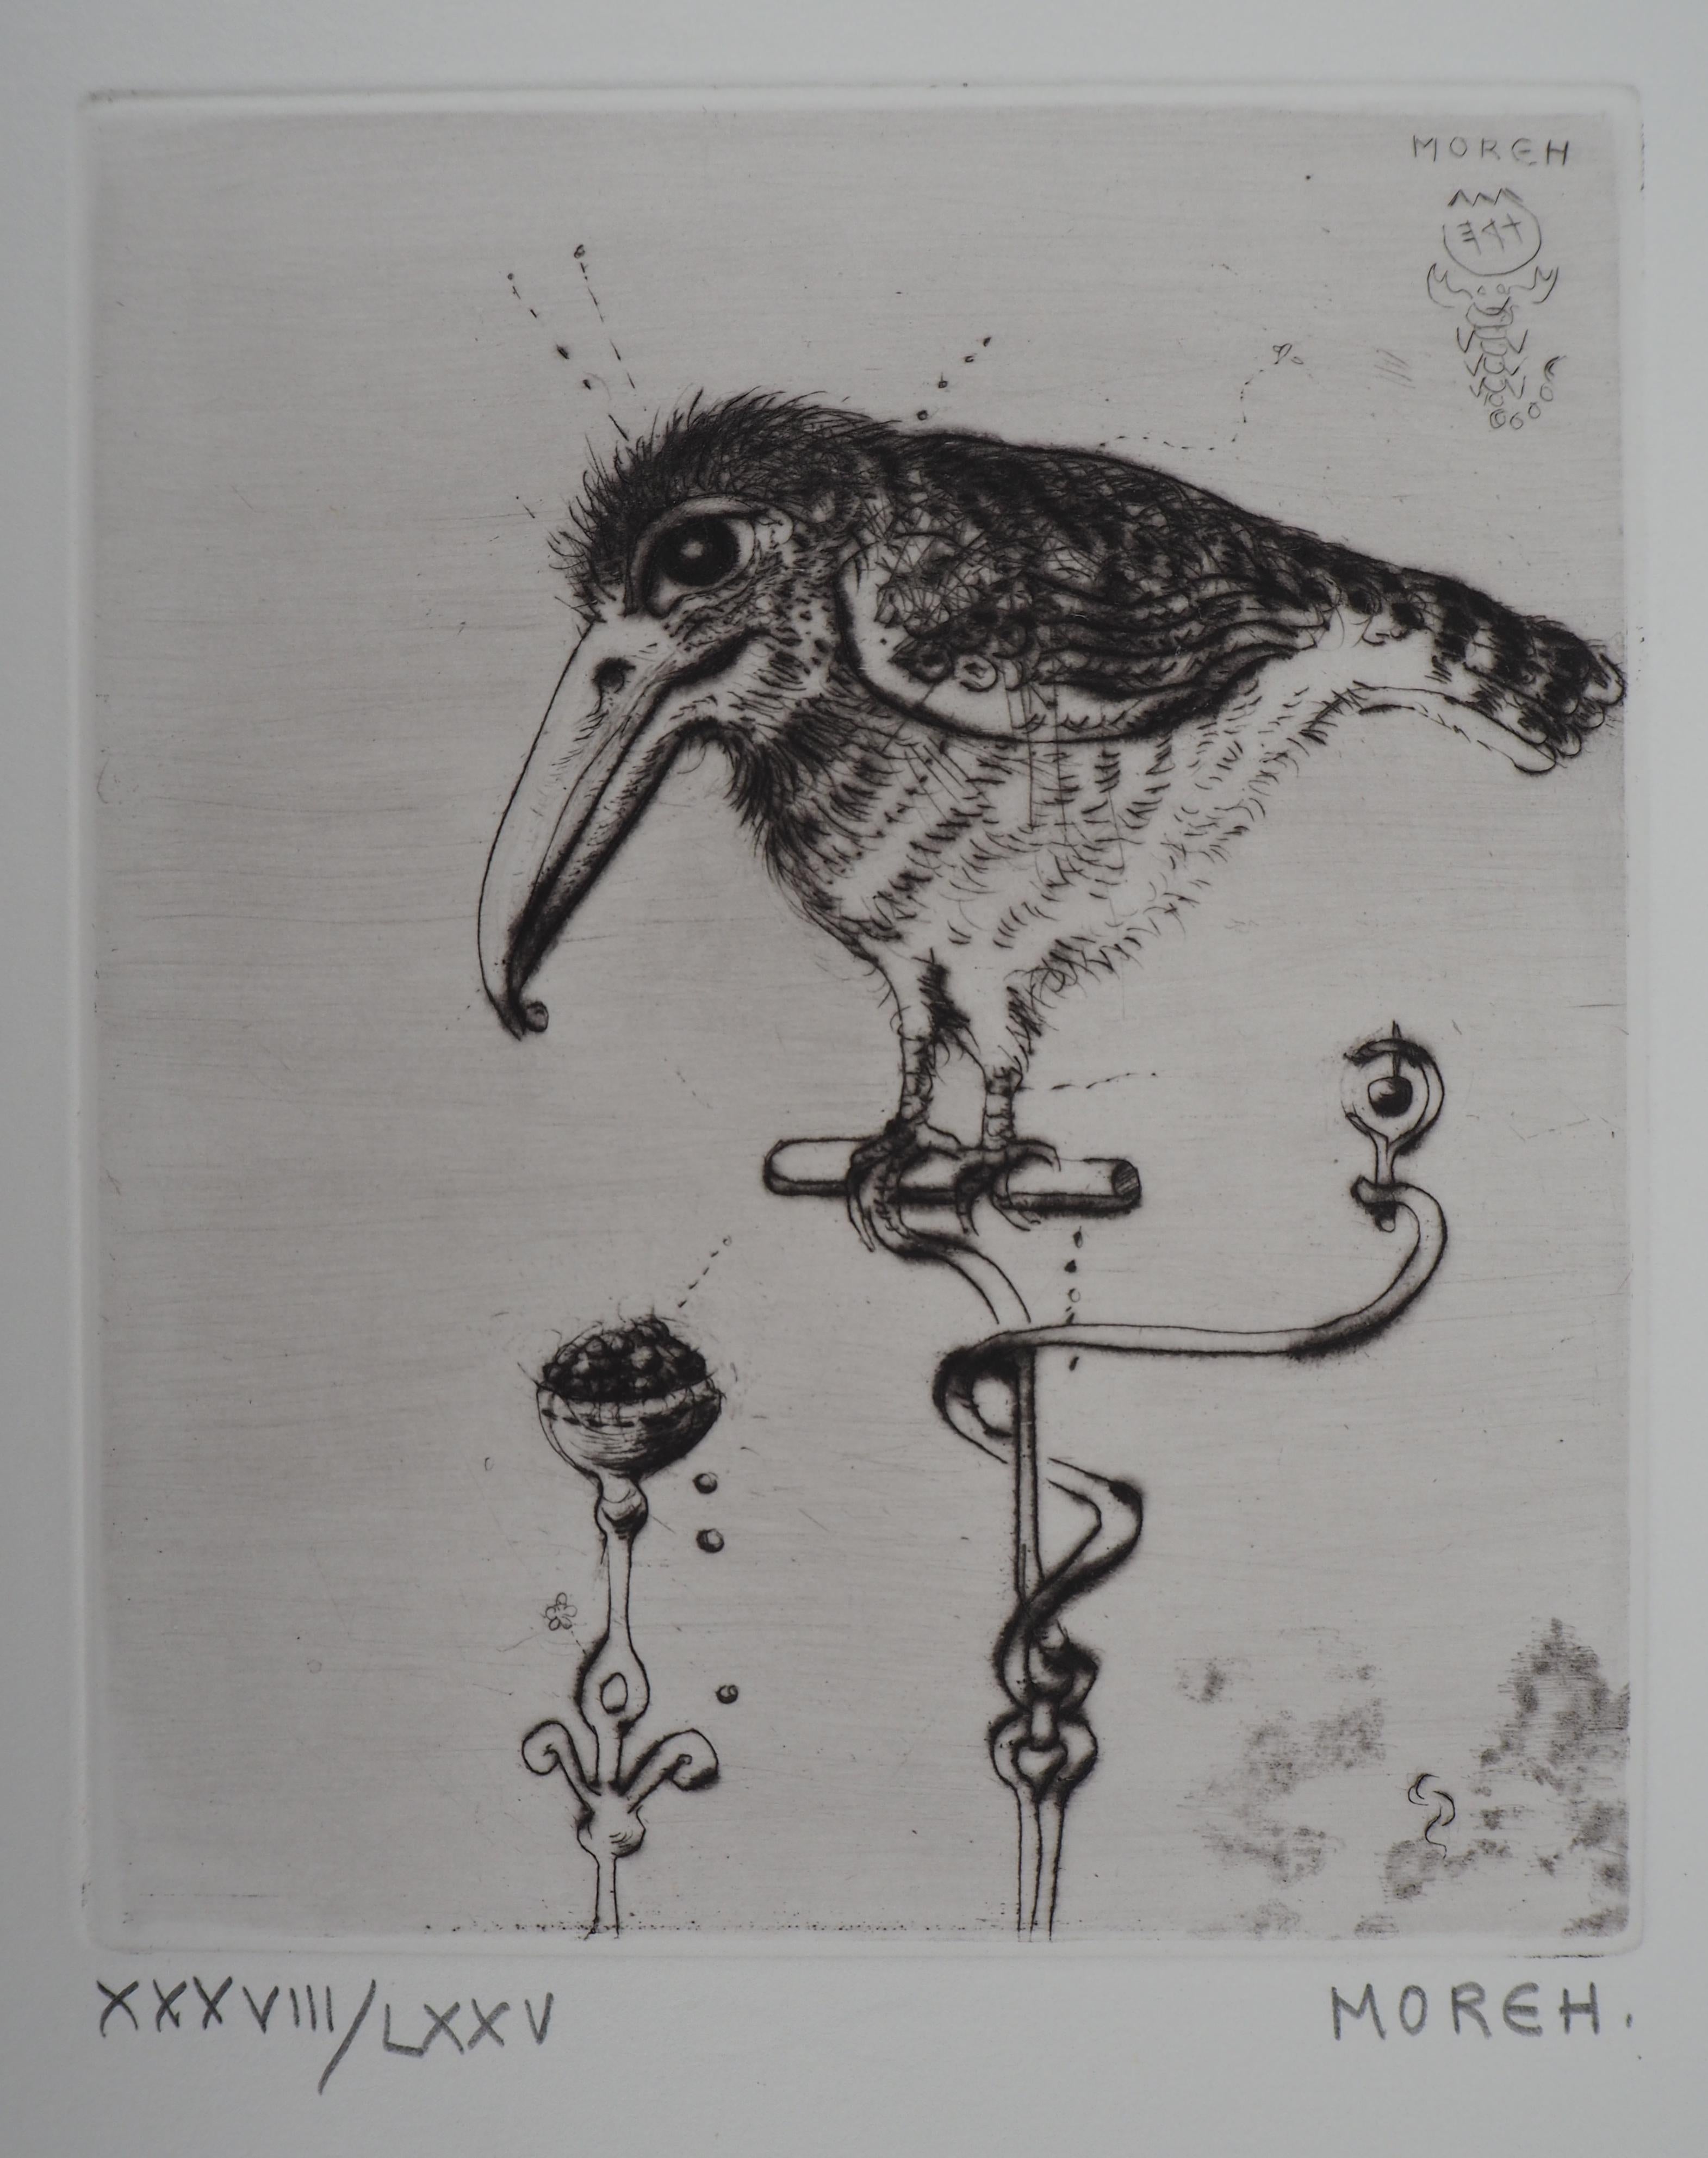 The Little Bird - Etching, Ltd 75 copies - Print by Mordecai Moreh